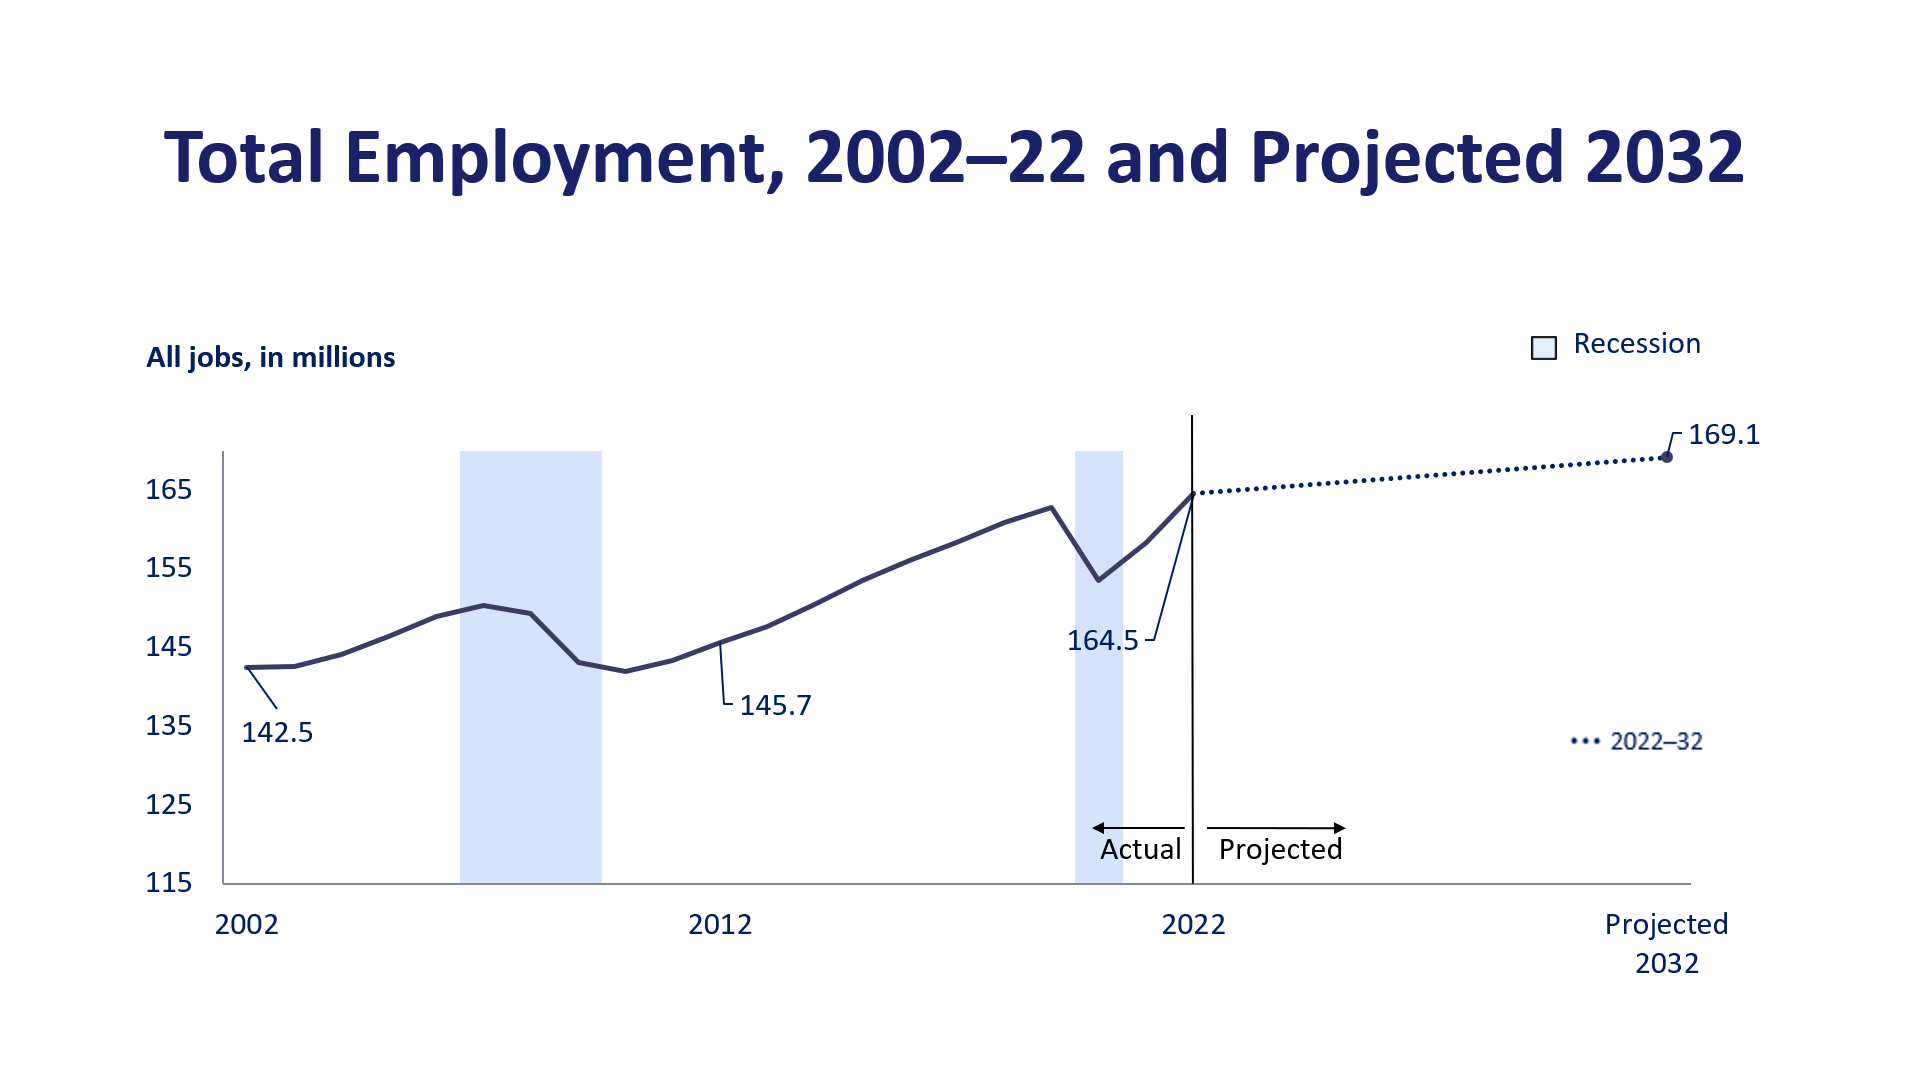 Total employment, 2002 to projected 2032